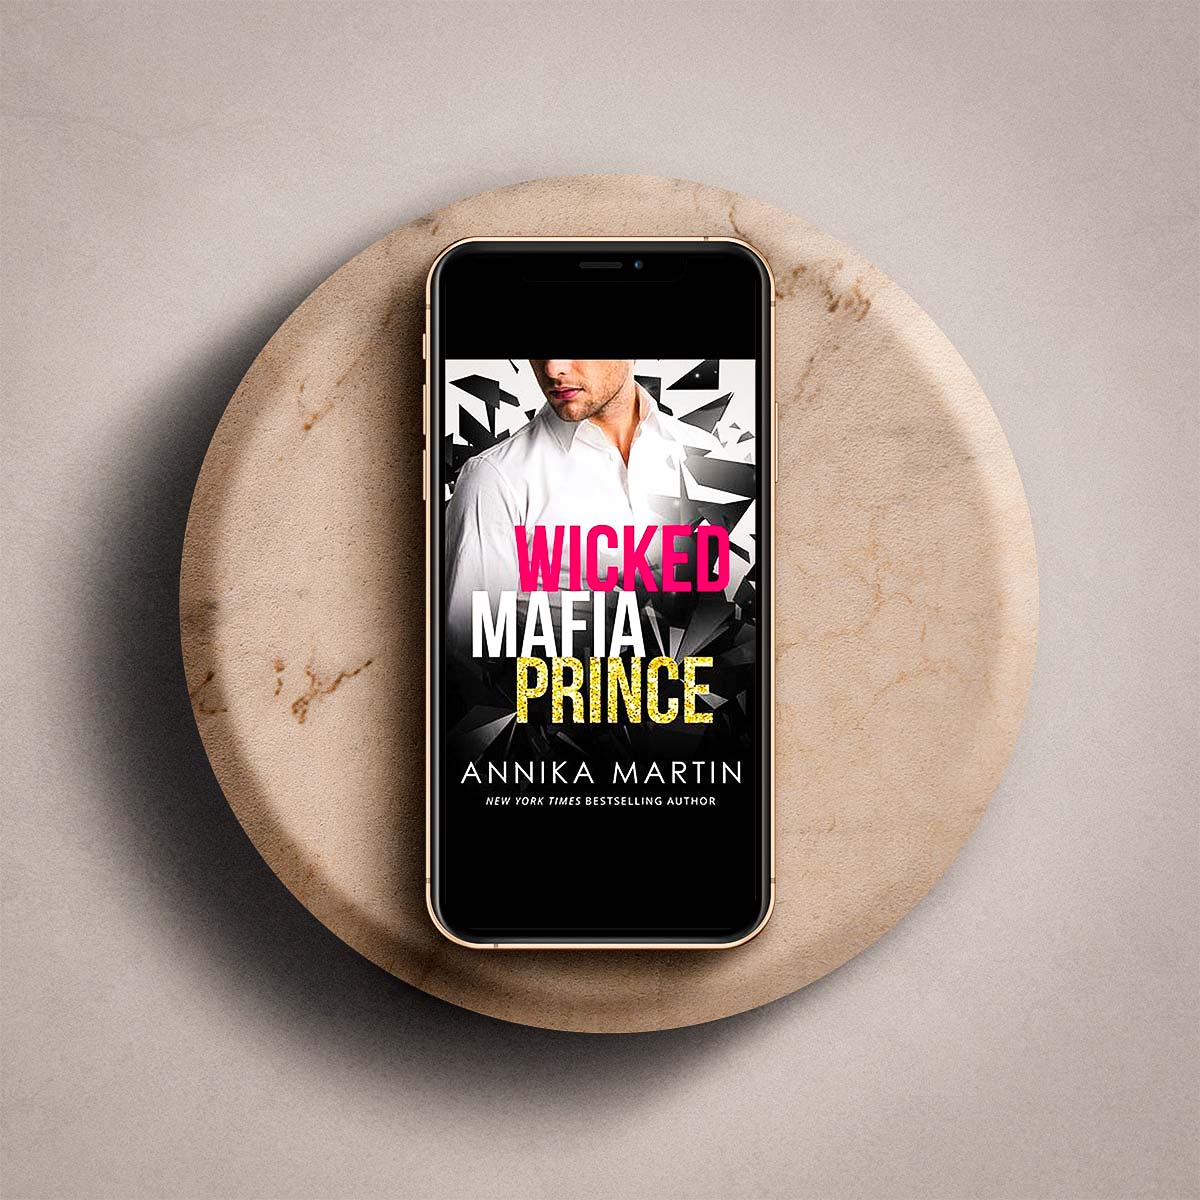 Wicked Mafia Prince by Annika Martin, book 2 in the Dangerous Royals, is full of danger and excitement, and it will keep you flipping pages until the end!